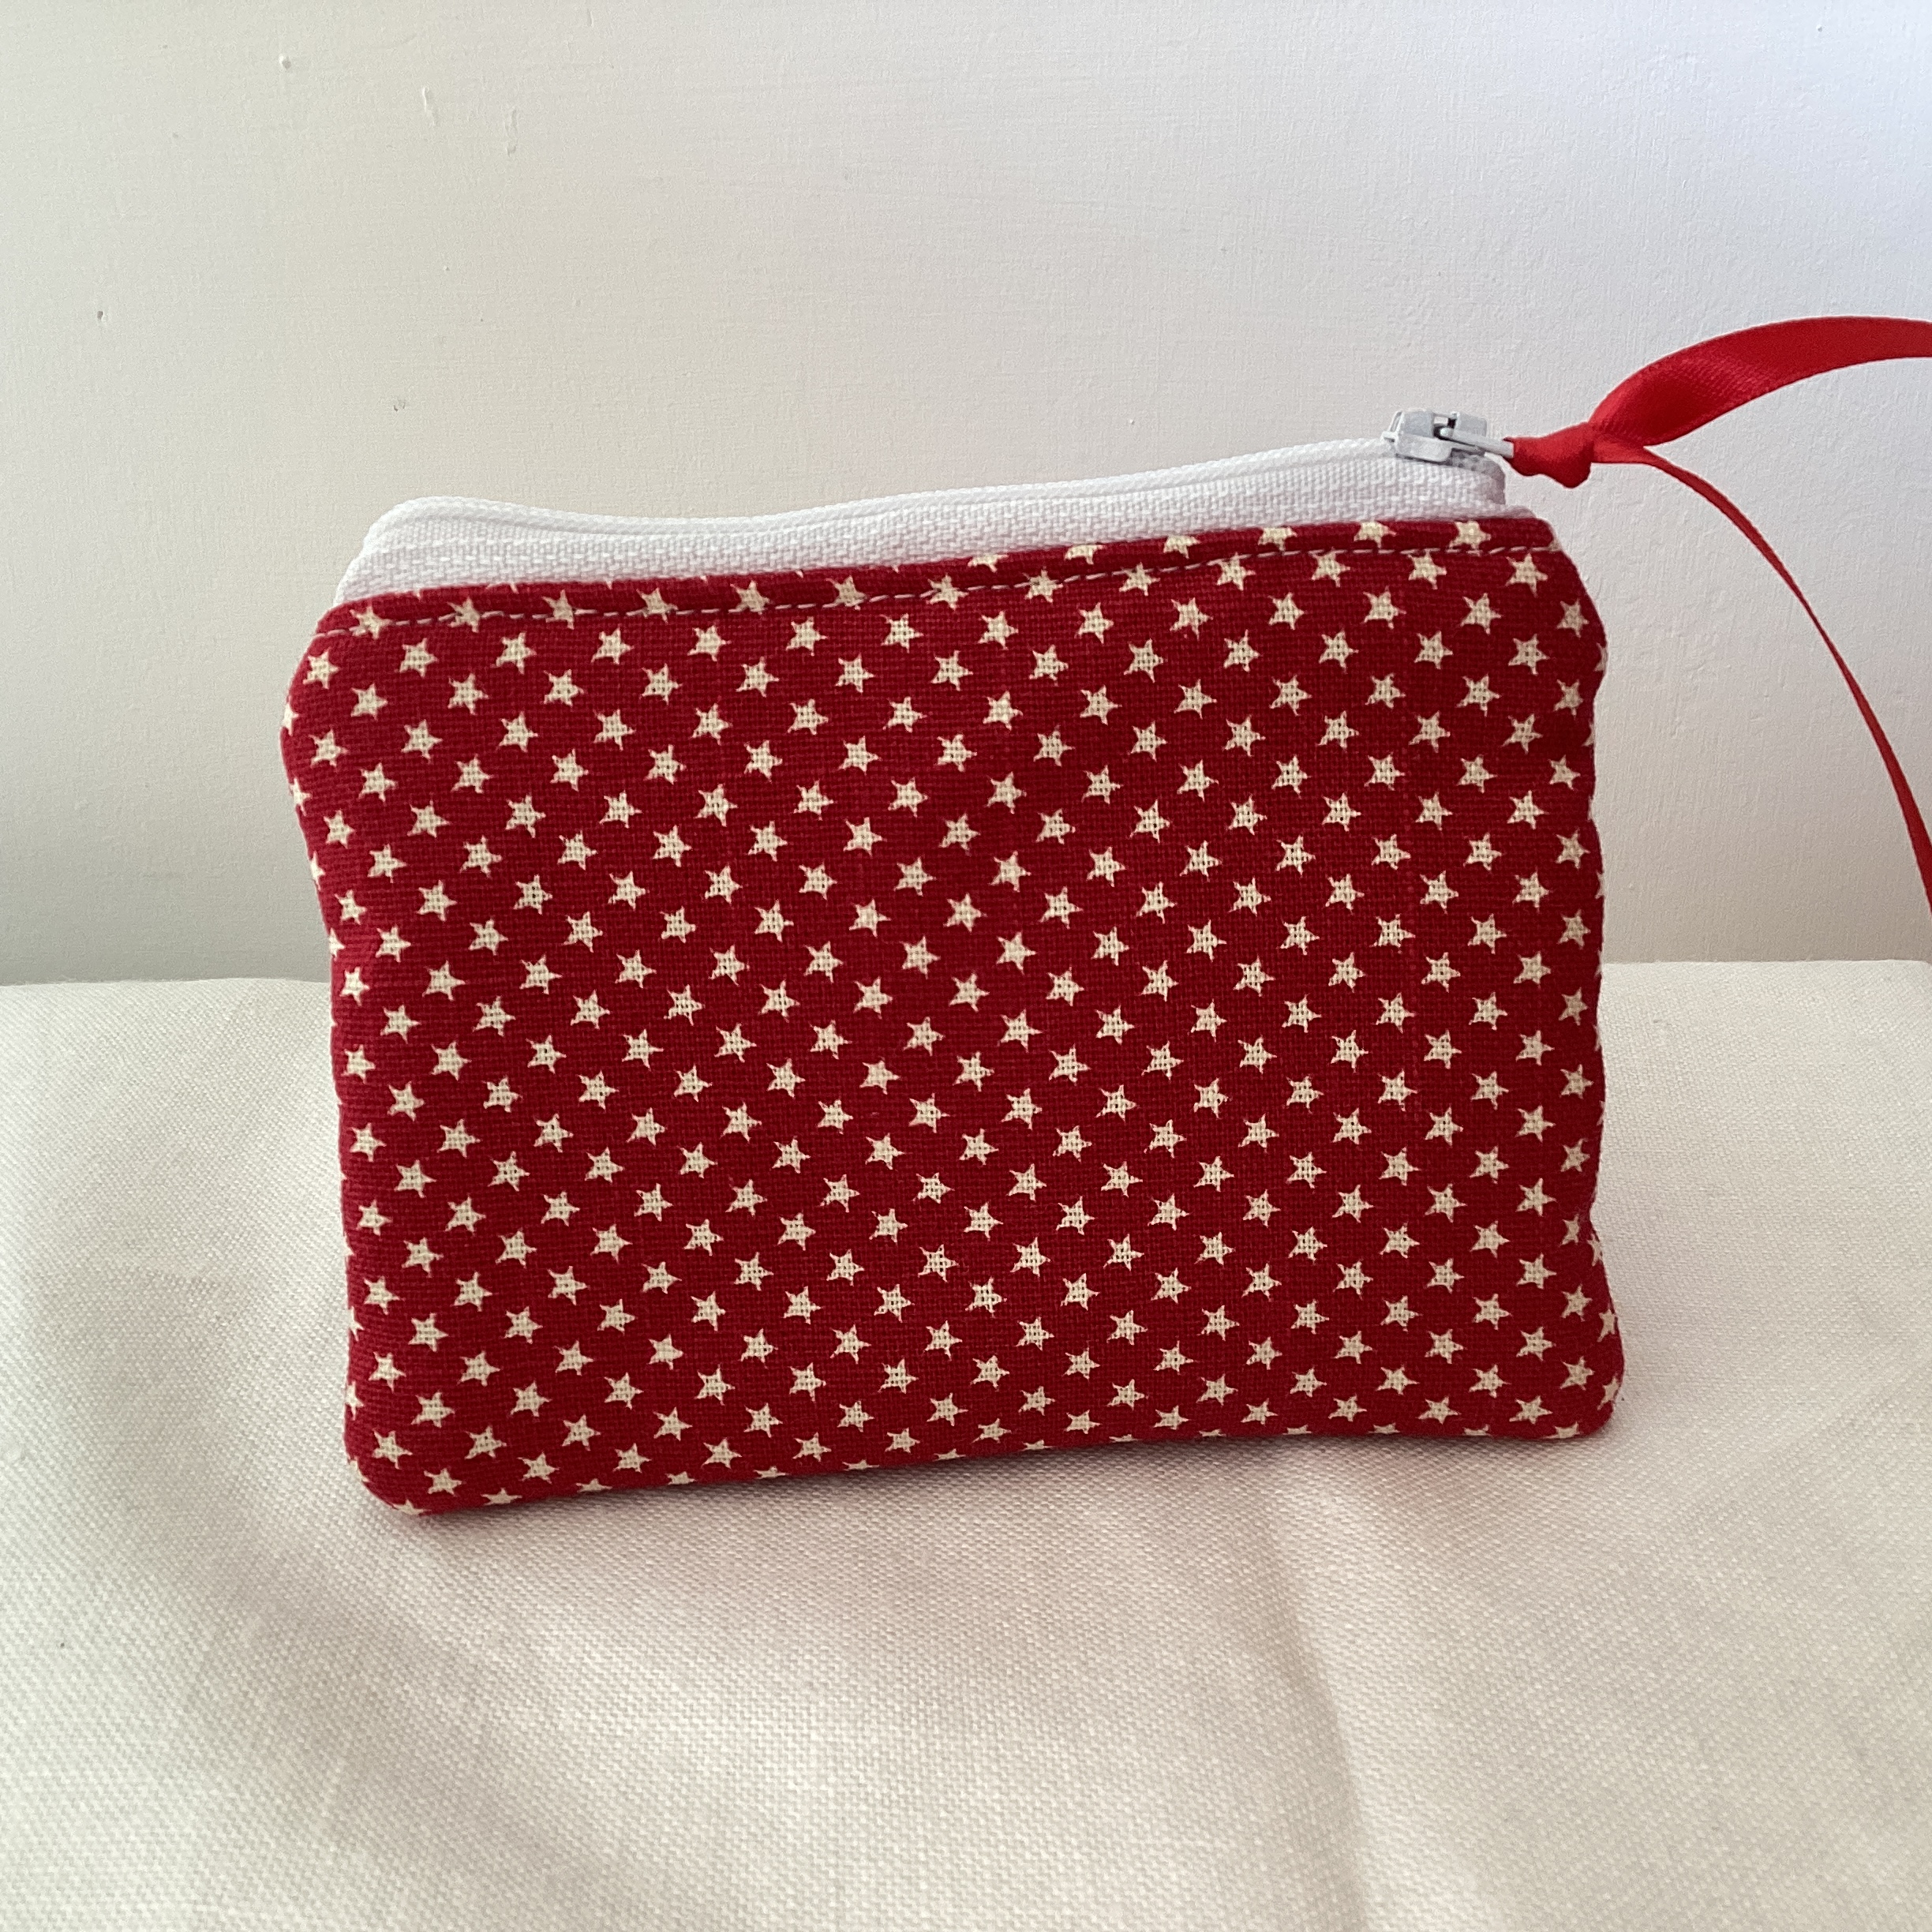 Zipped Coin Purse - red and white stars